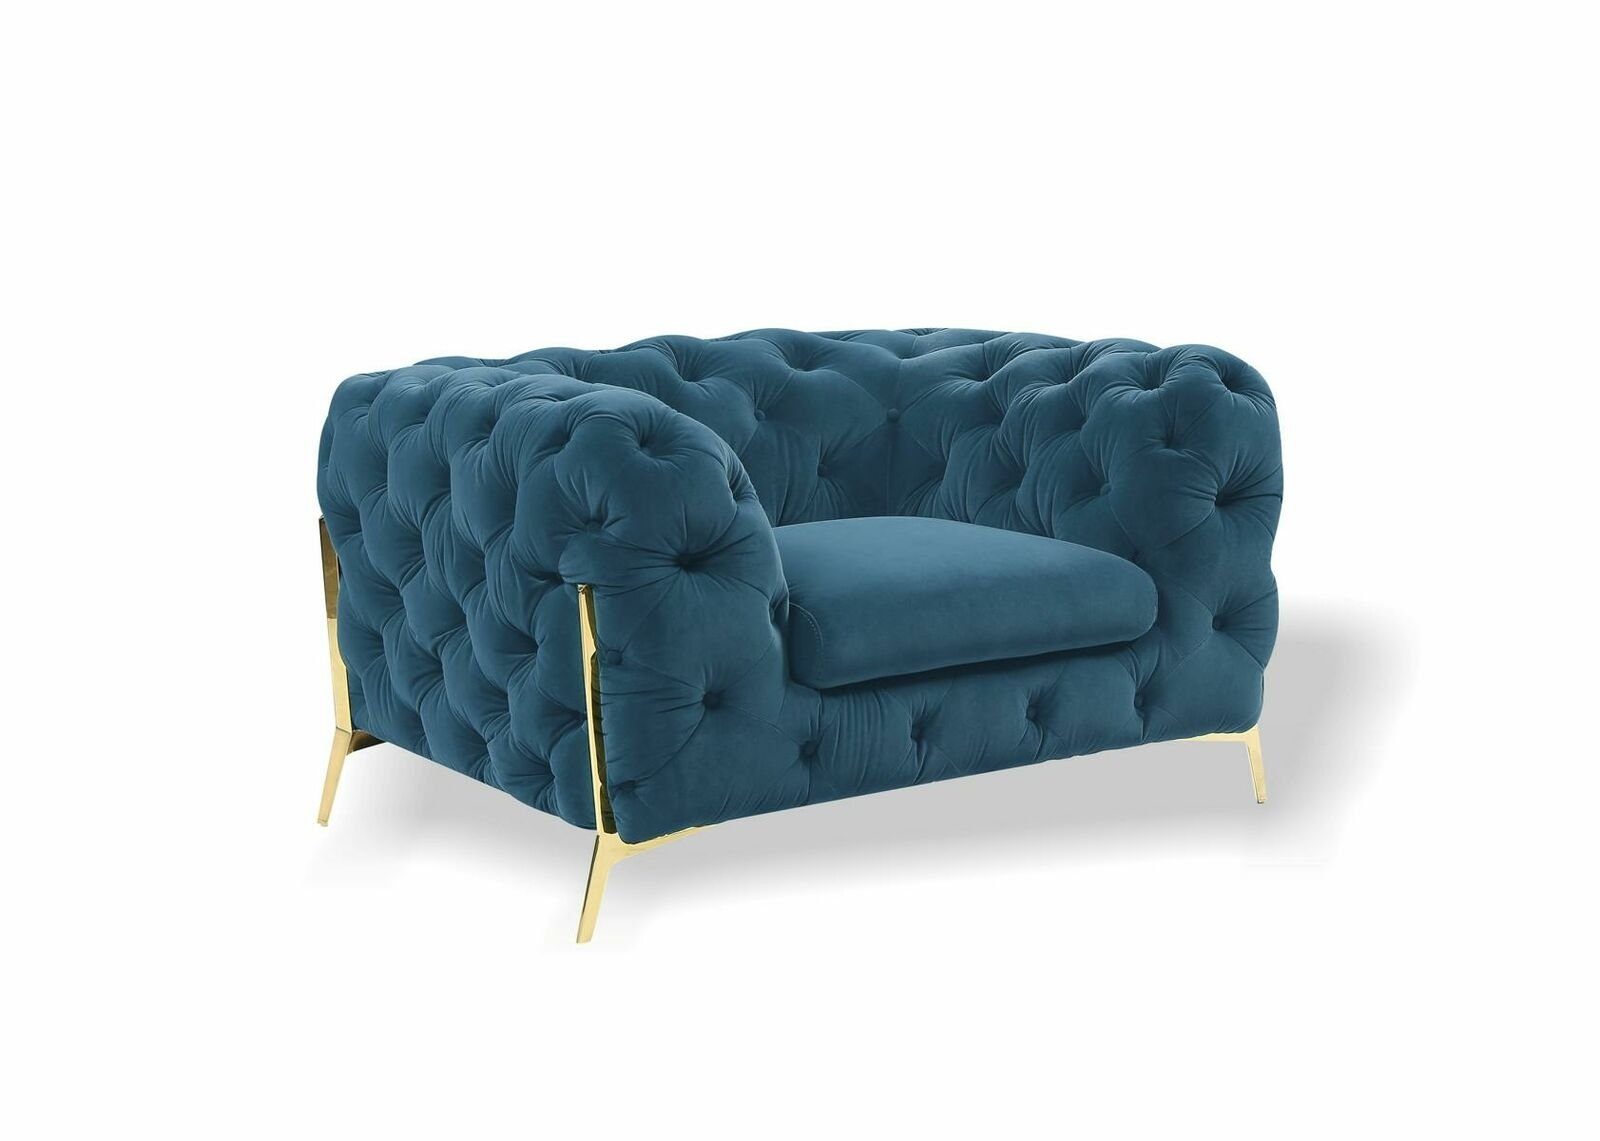 Couch Couch in Sitzer Chesterfield 1 Ohrensessel (Sessel), JVmoebel Made Sofa Blau Polster Sessel Ohrensessel Europe